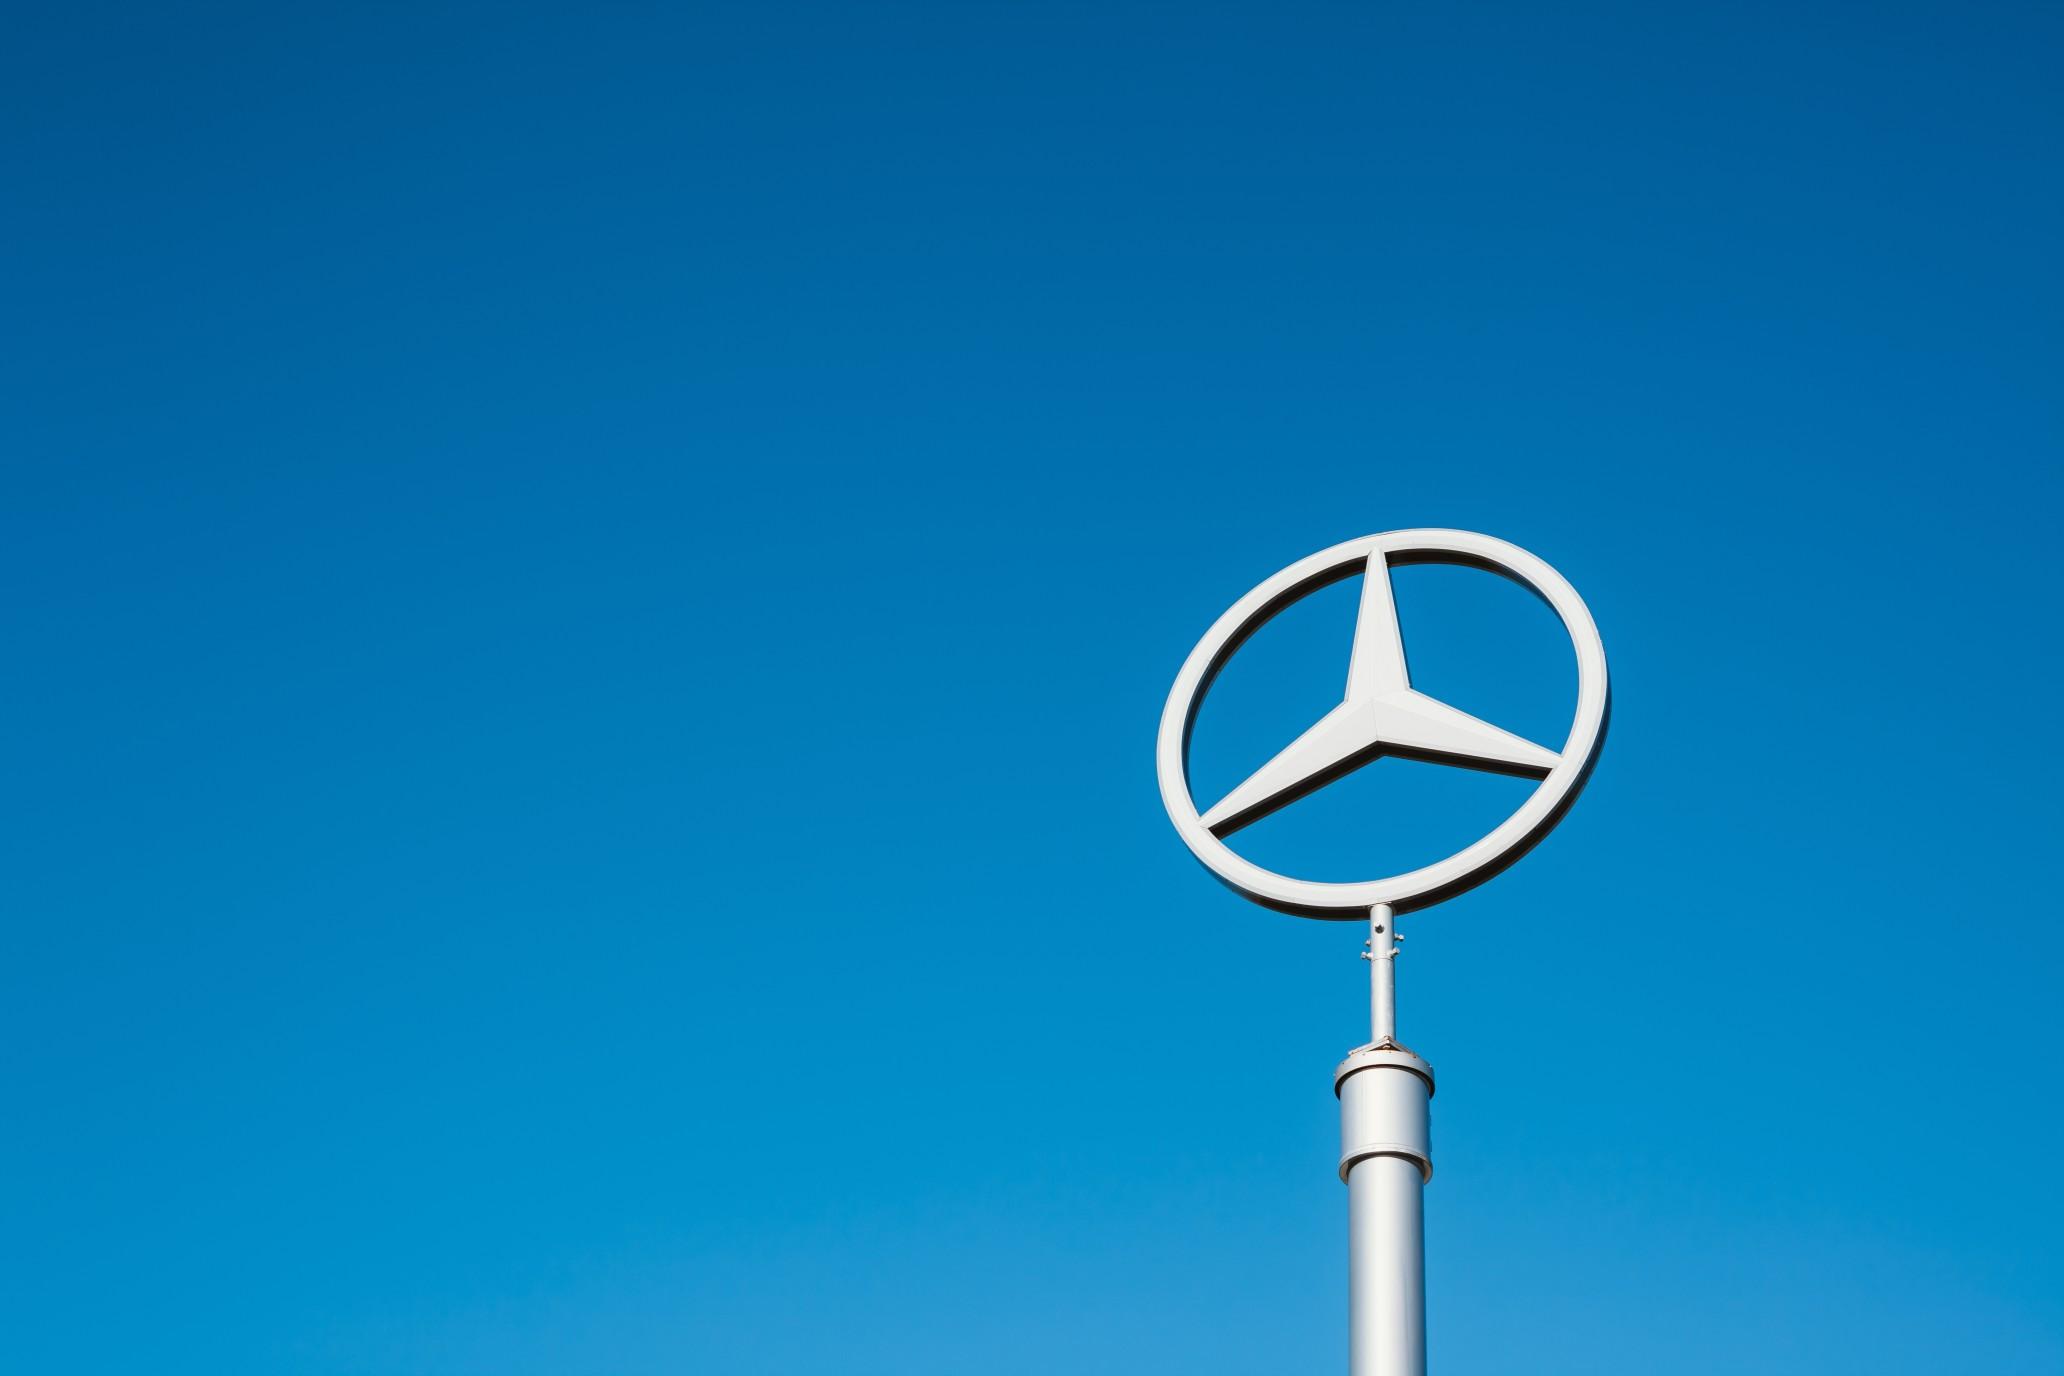 Mercedes-Benz is making a Tesla-like update to some of its cars.